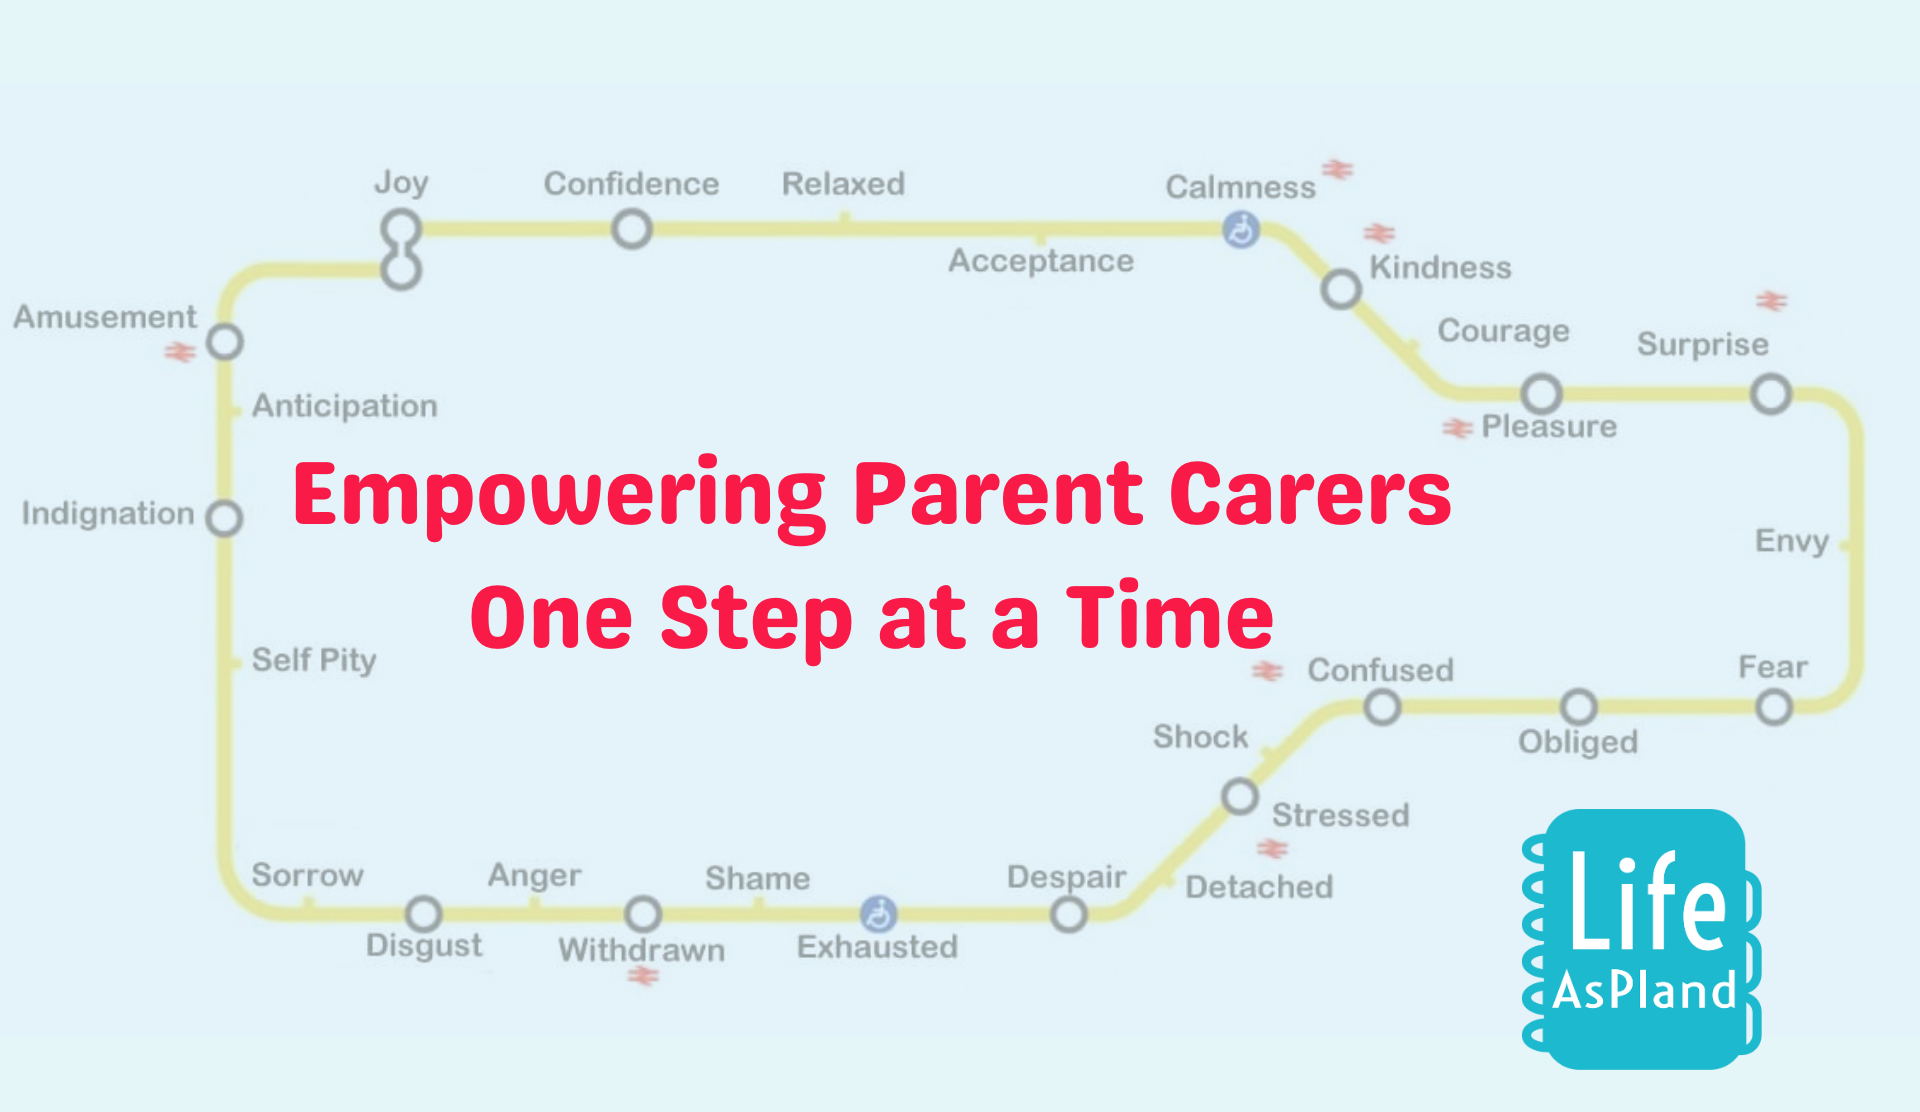 A tube line with stations showing emotions. With the words "empowering parent carers one step at a time" in the middle of the map with the Life AsPland logo.